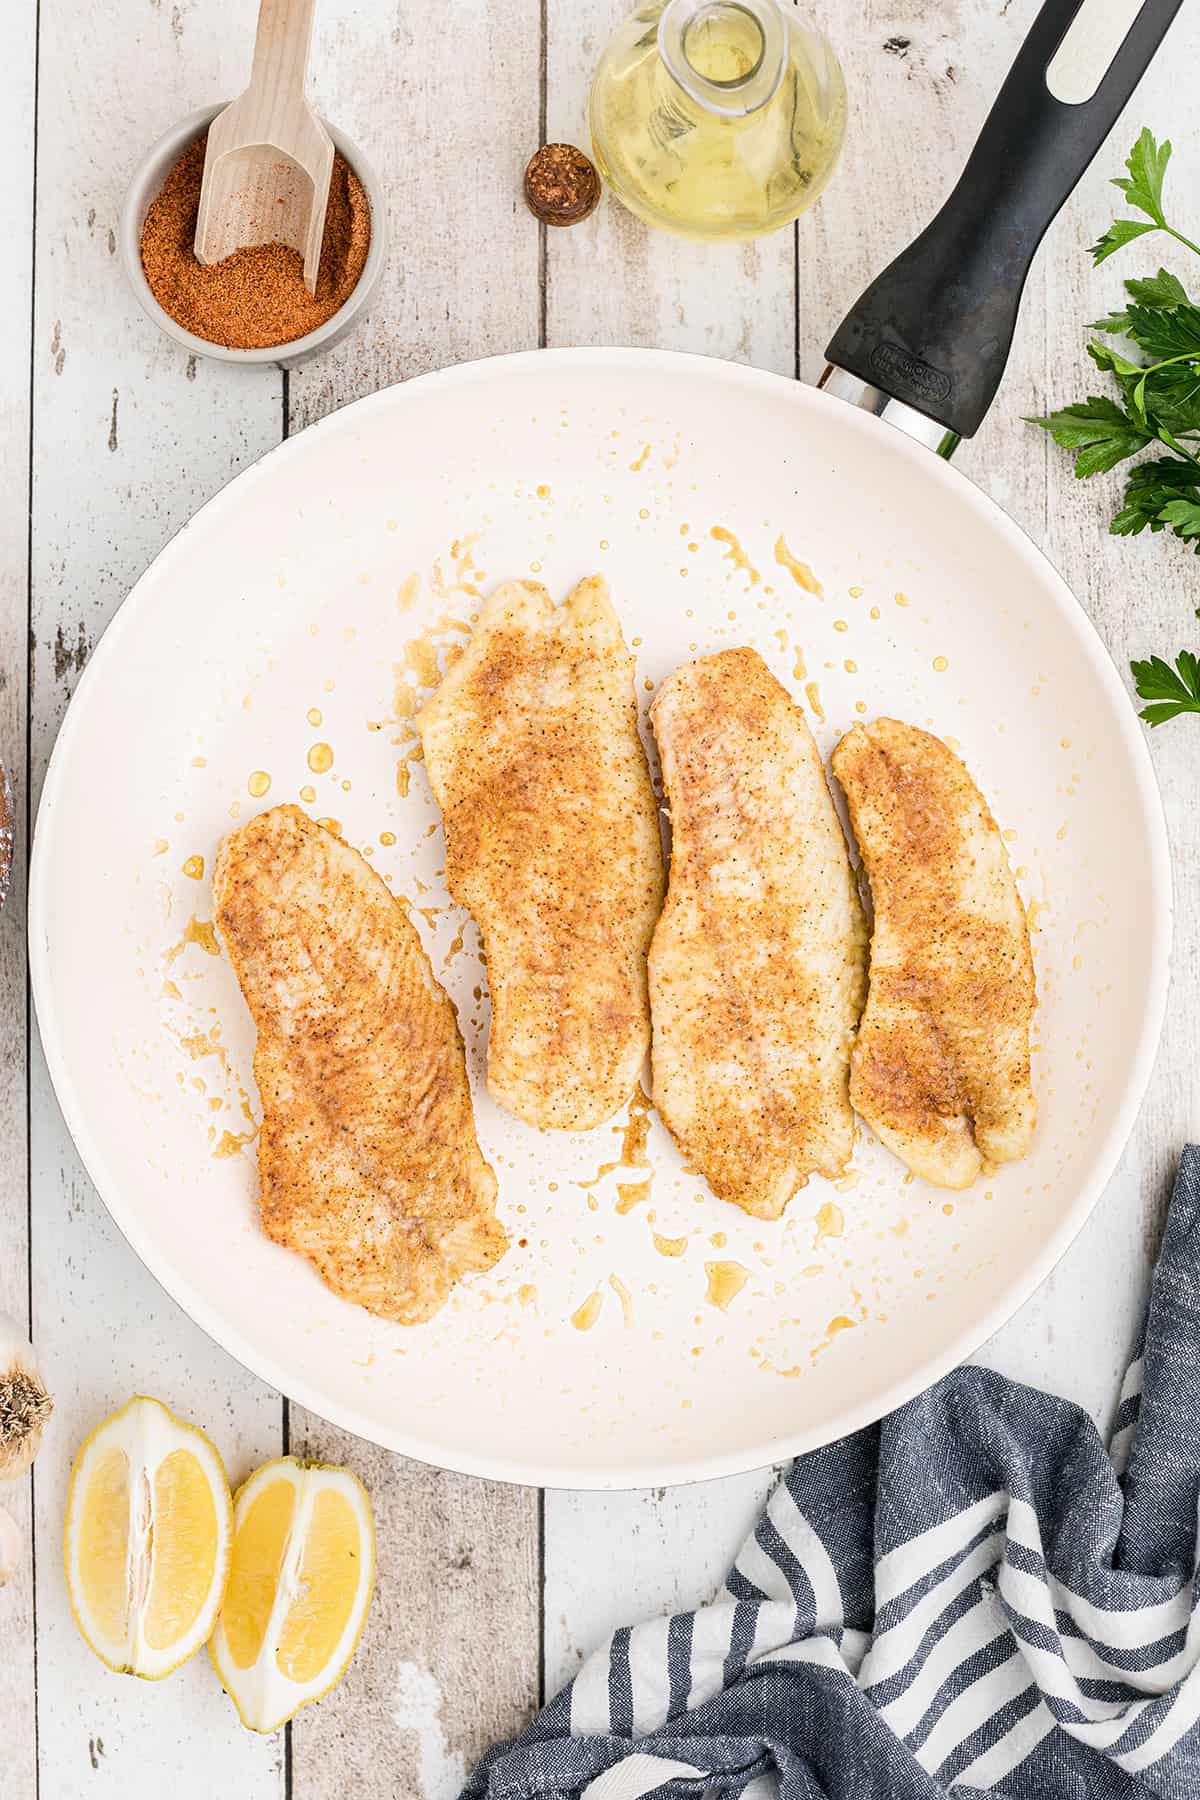 Cooked fish fillets on a plate.